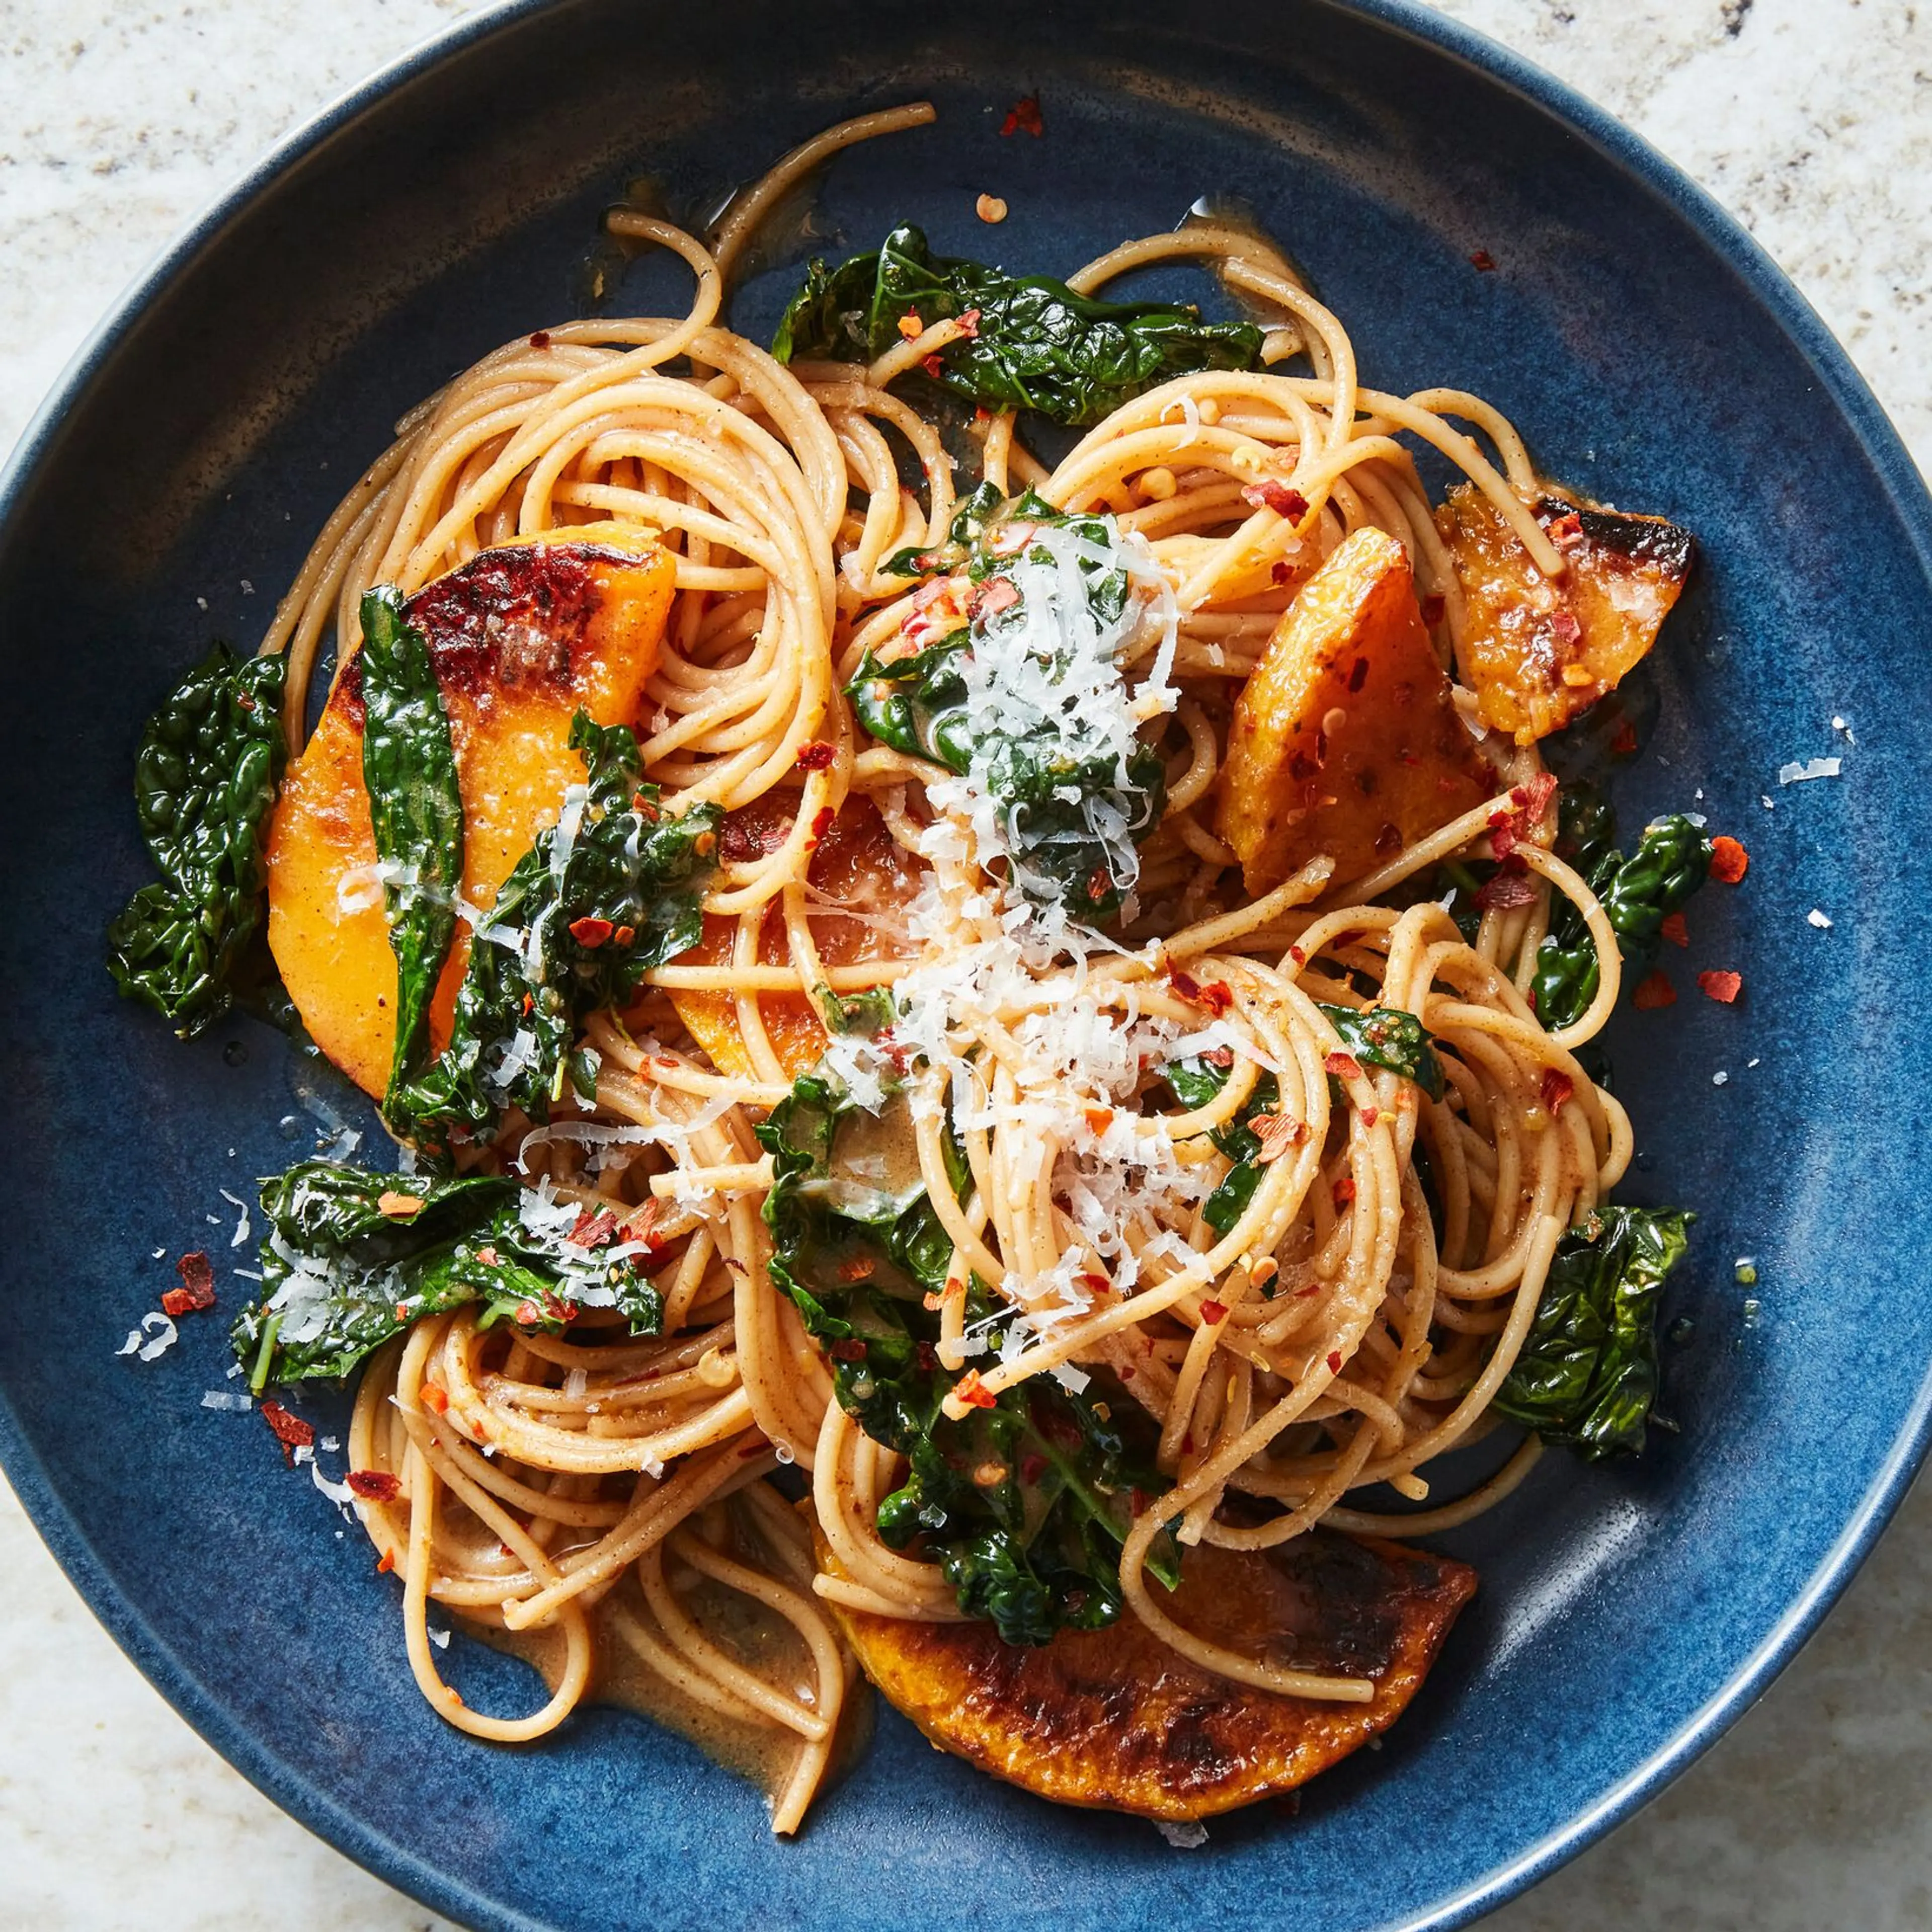 Pasta With Butternut Squash, Kale and Brown Butter